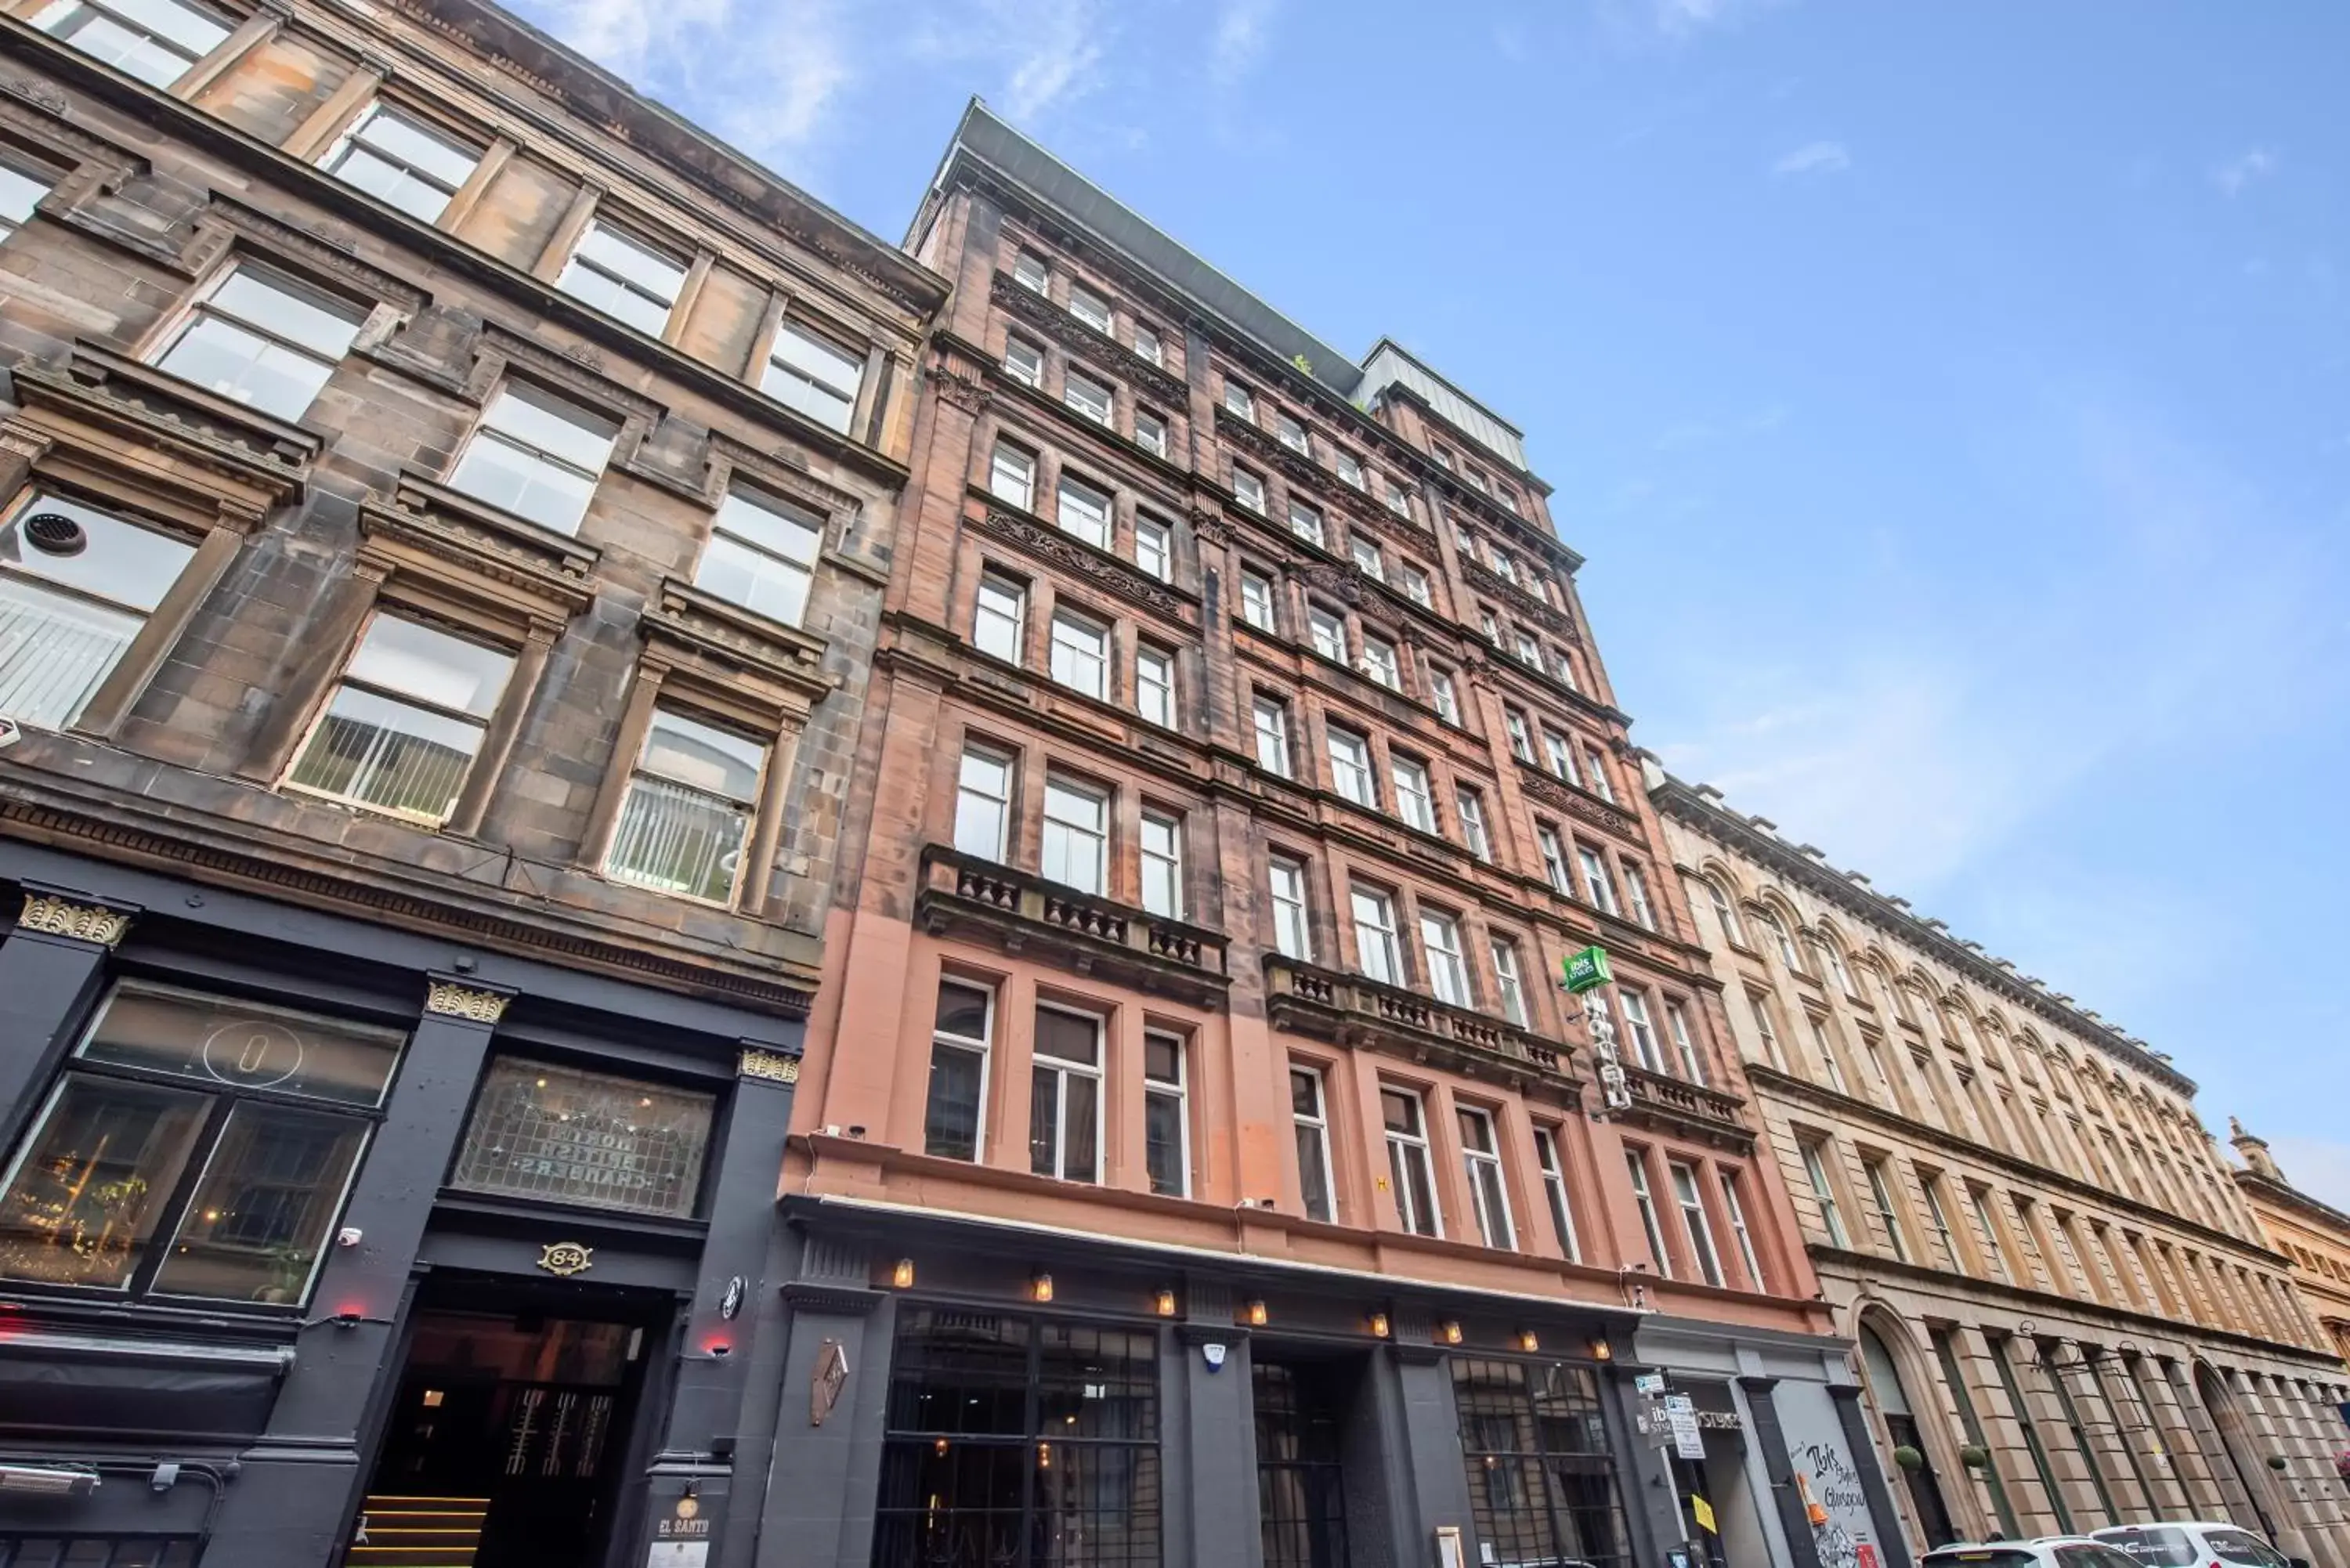 Property Building in ibis Styles Glasgow Centre George Square